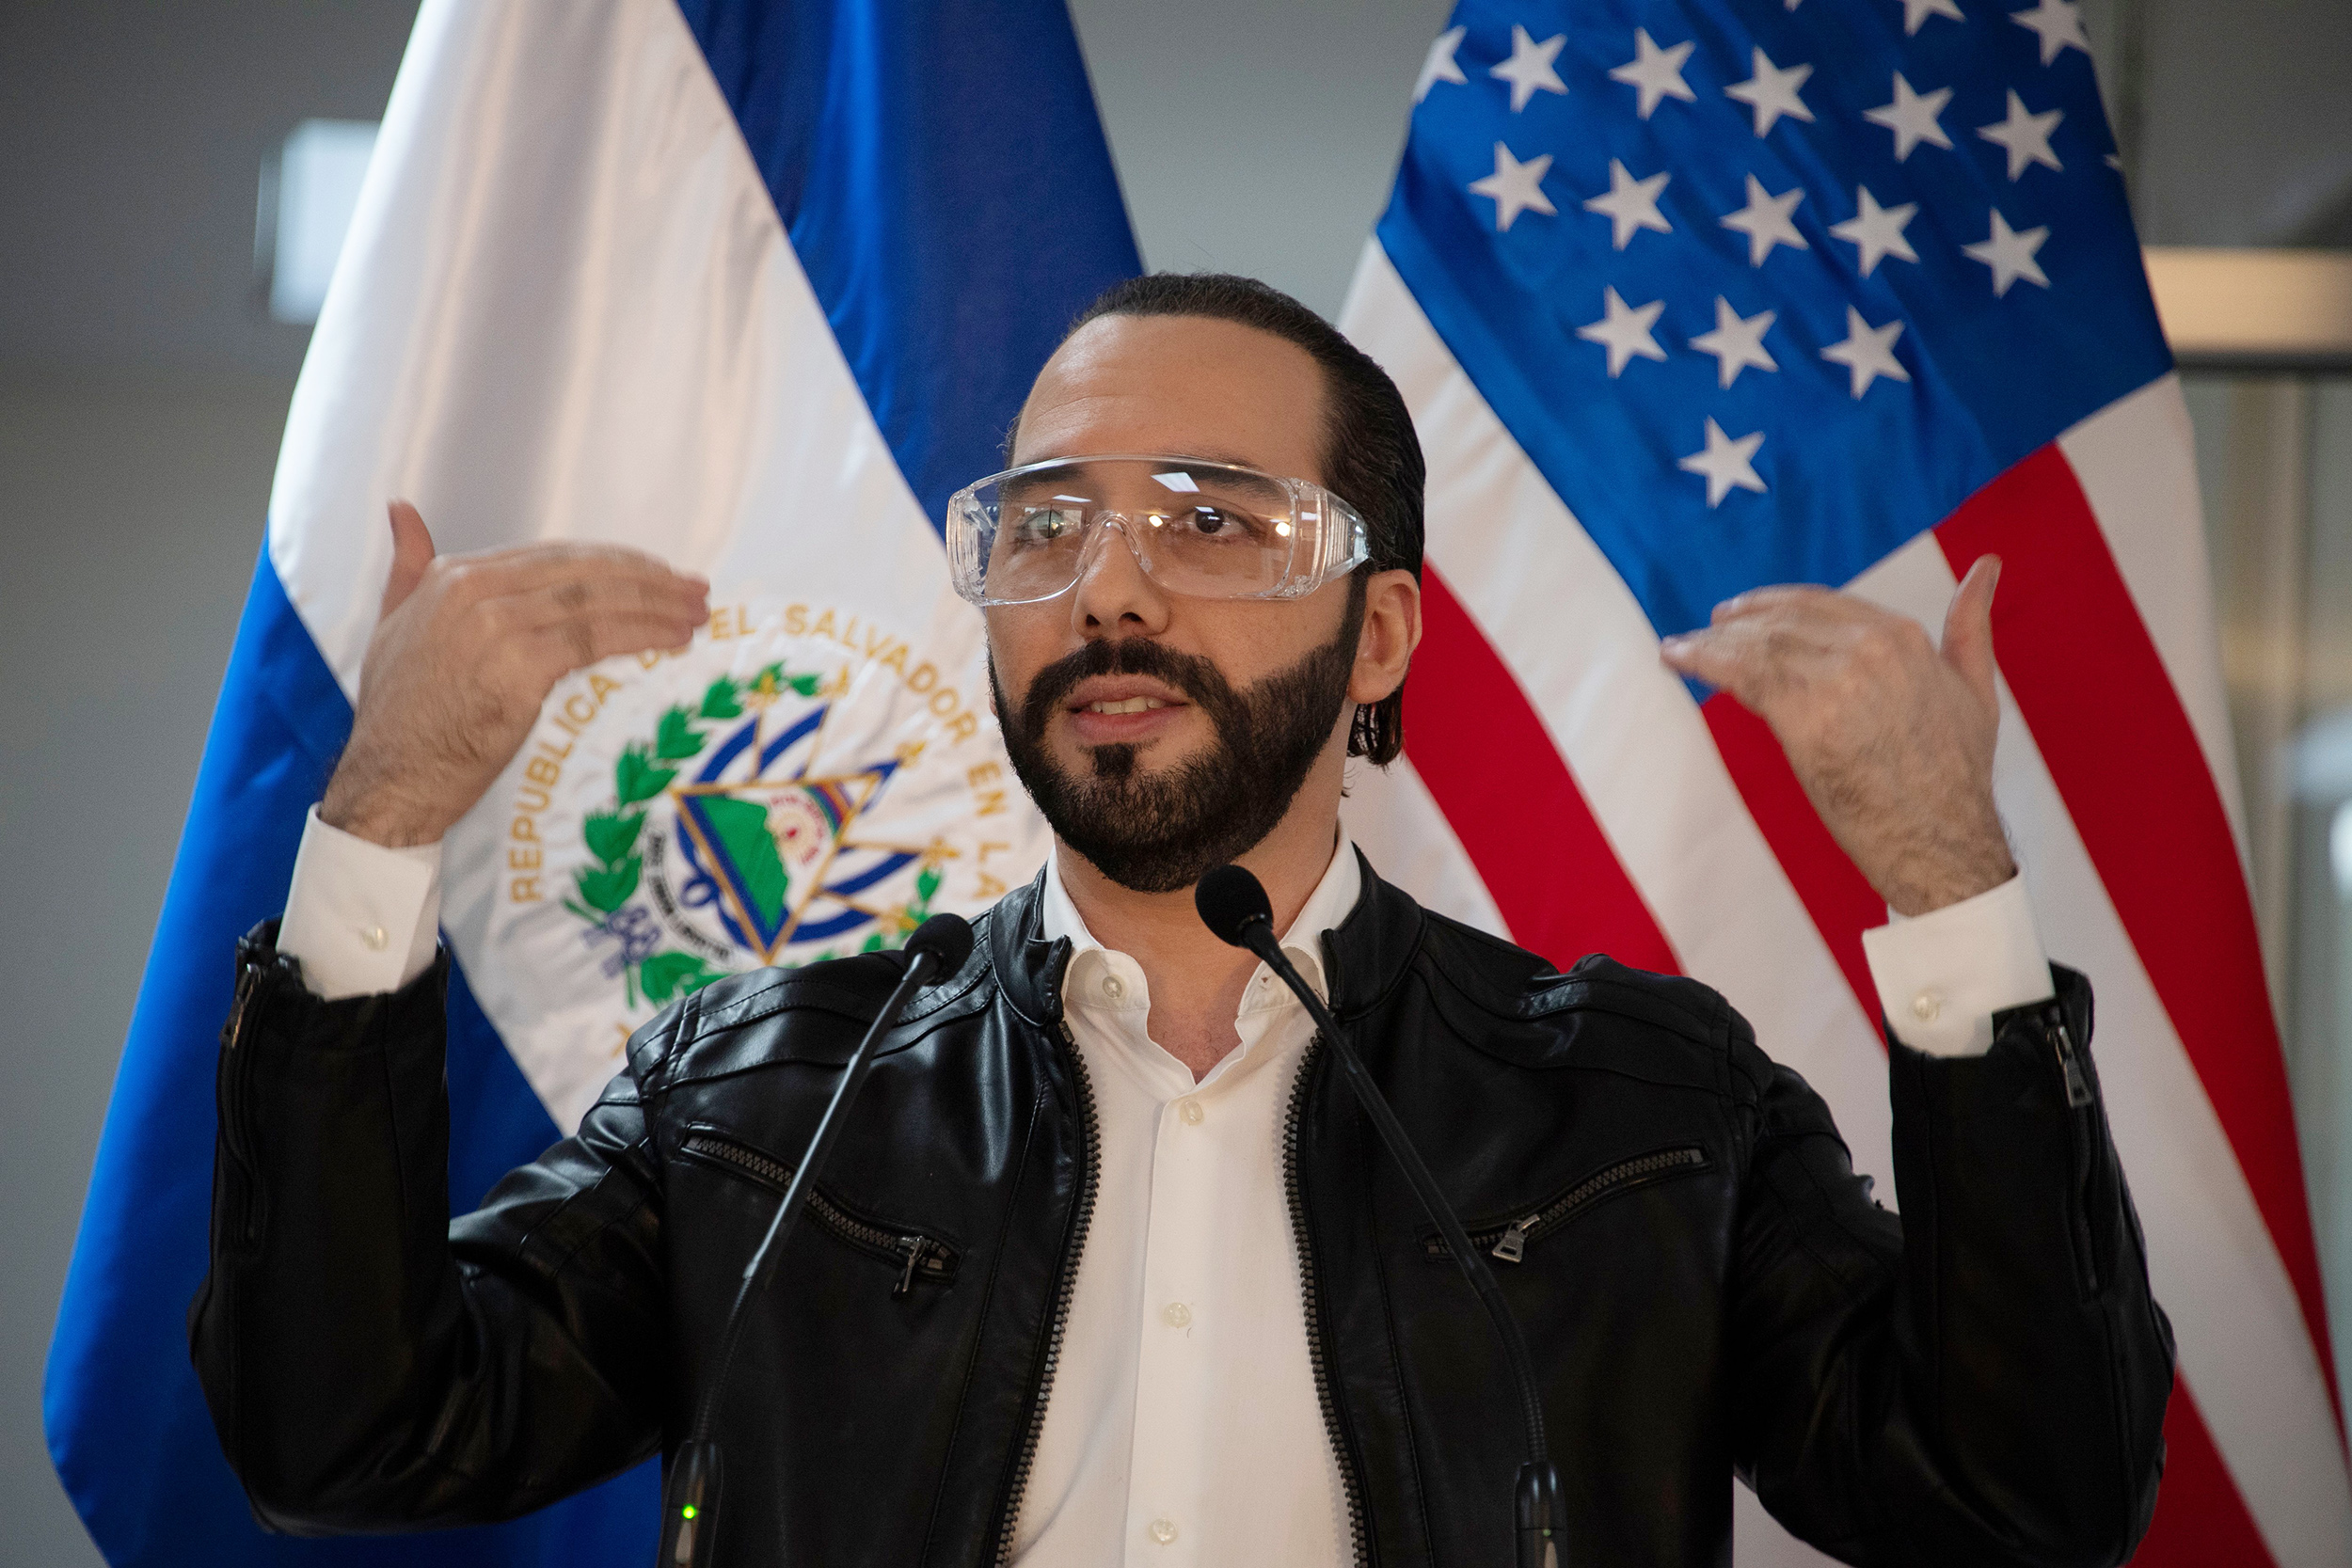 El Salvador's President Bukele Has An 85% Approval Rating In A New Gallup Poll, Thanks To His Bitcoin Experiment.